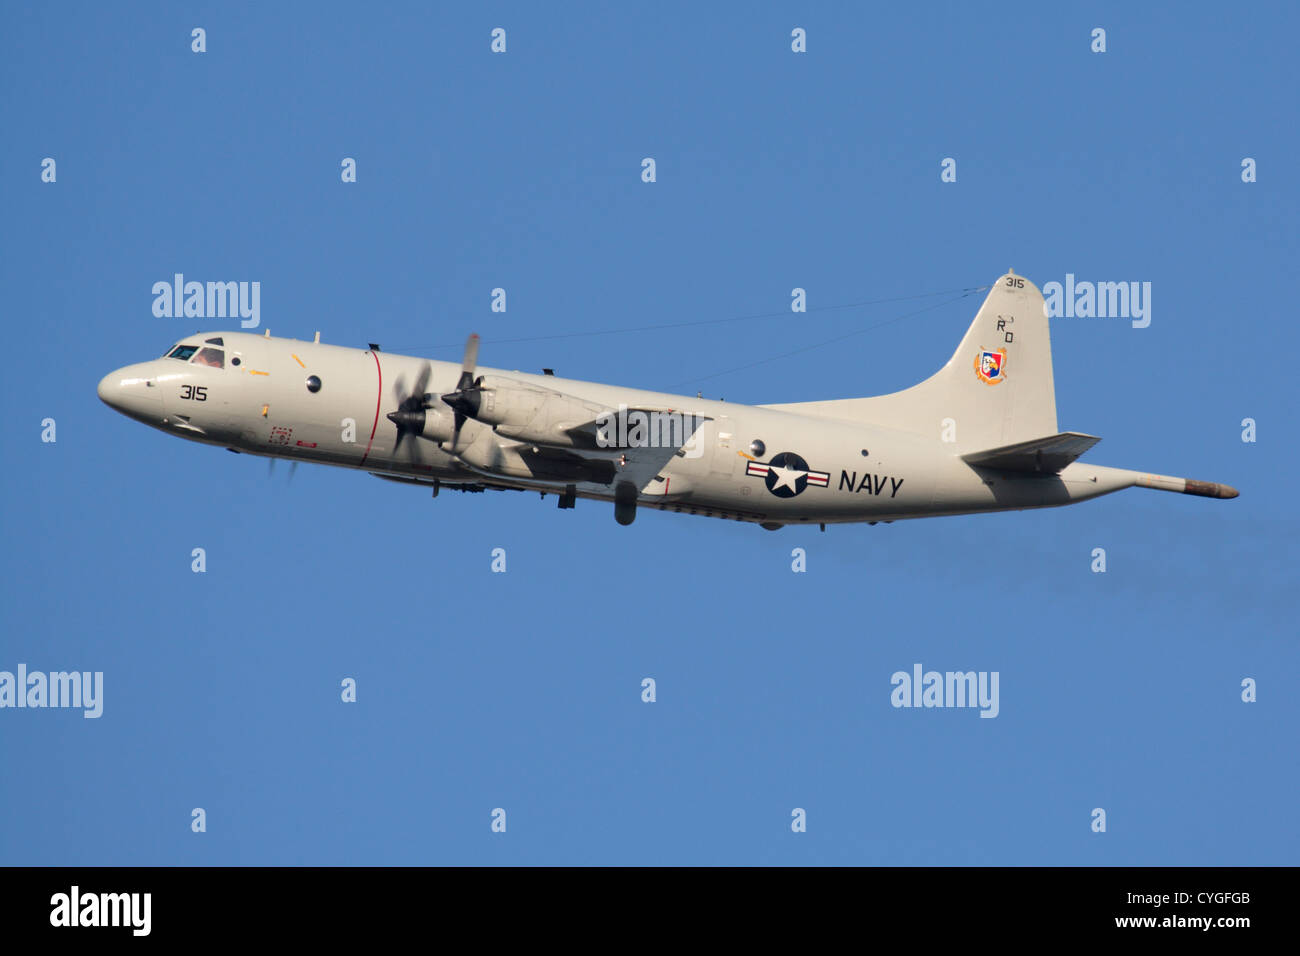 United States Navy Lockheed P-3C Orion turboprop maritime patrol plane flying against a clear blue sky Stock Photo